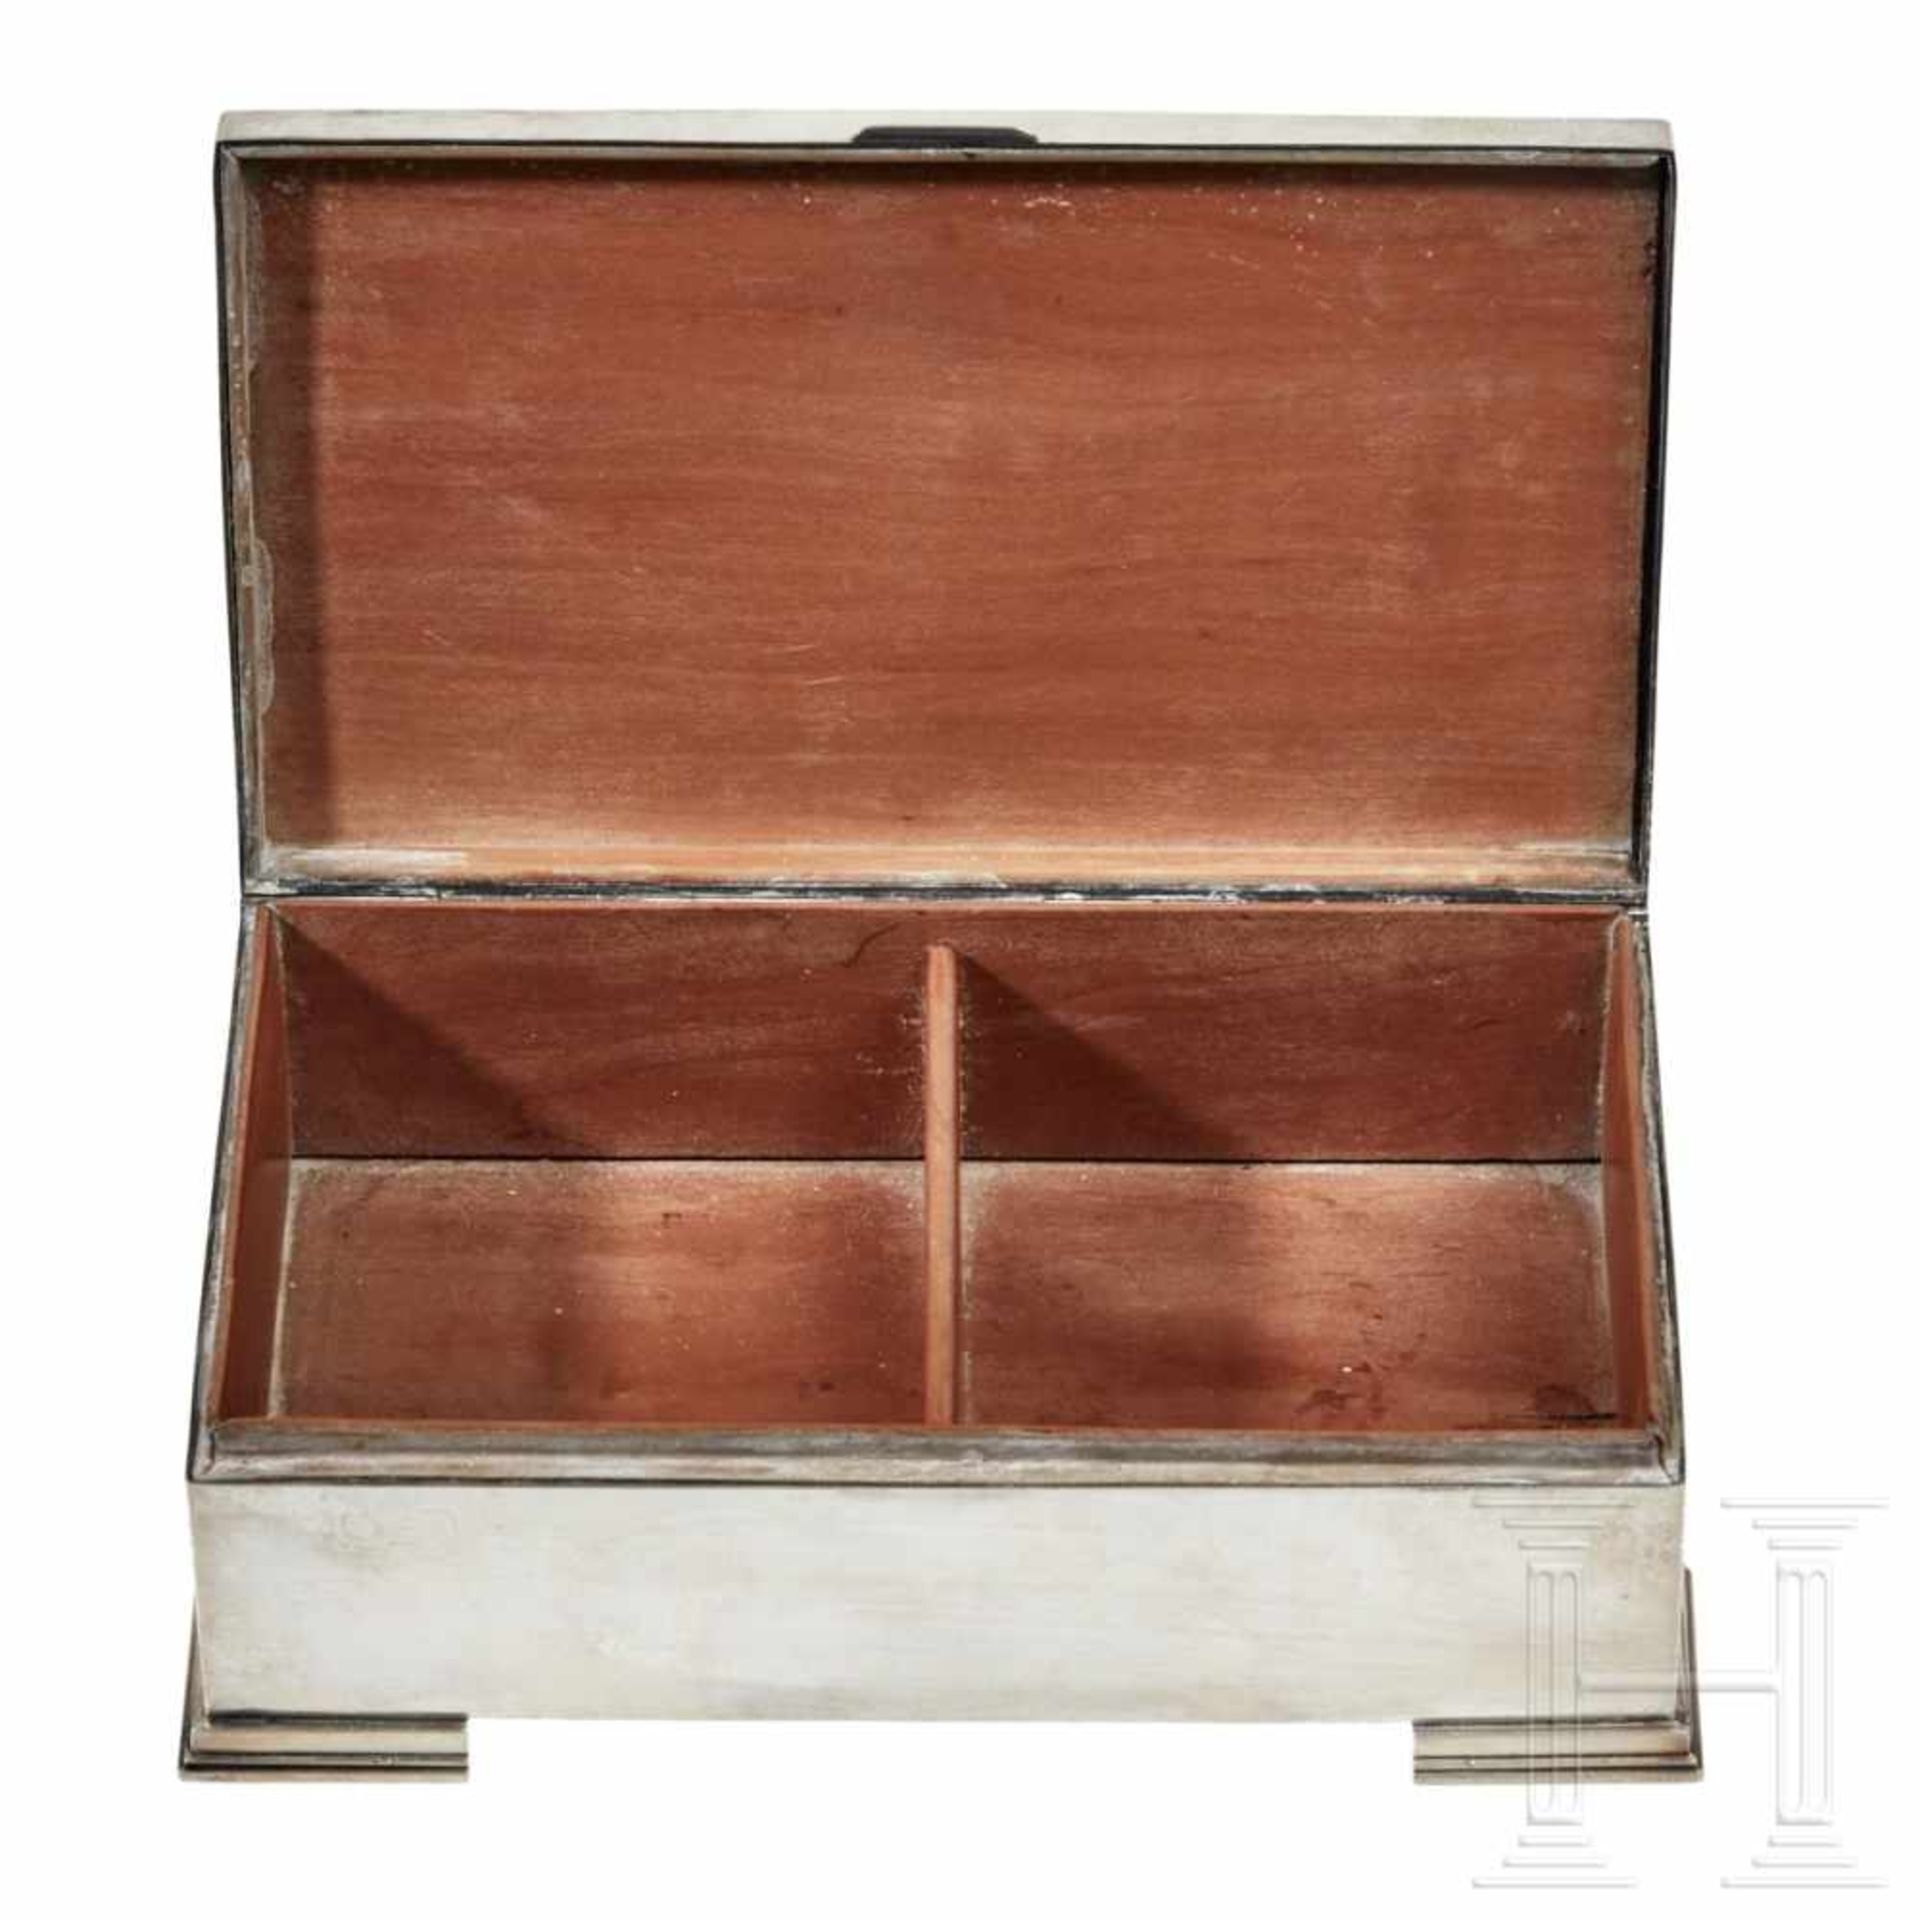 Adolf Hitler – a Cigarette Box from his Personal Silver ServiceSilver with highly polished surfaces, - Bild 3 aus 5